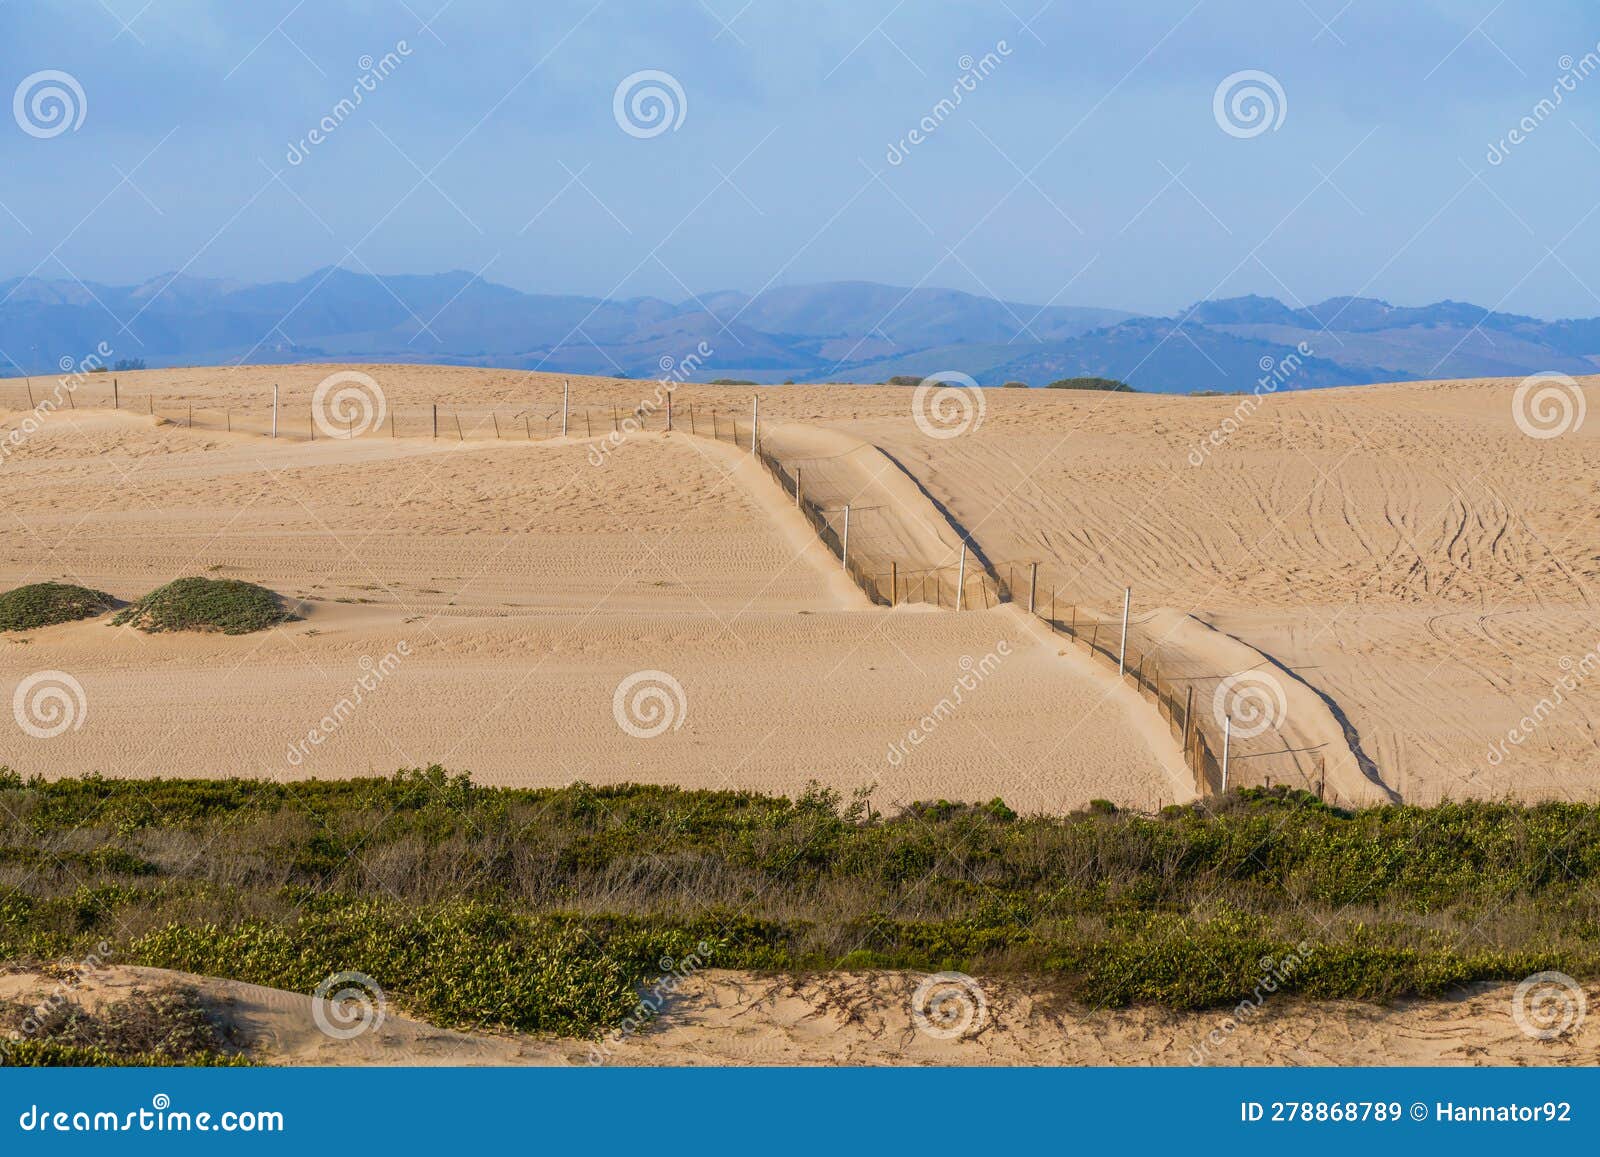 sand dunes, silhouettes of mountains, and a cloudy sky in the background. oceano dunes, california